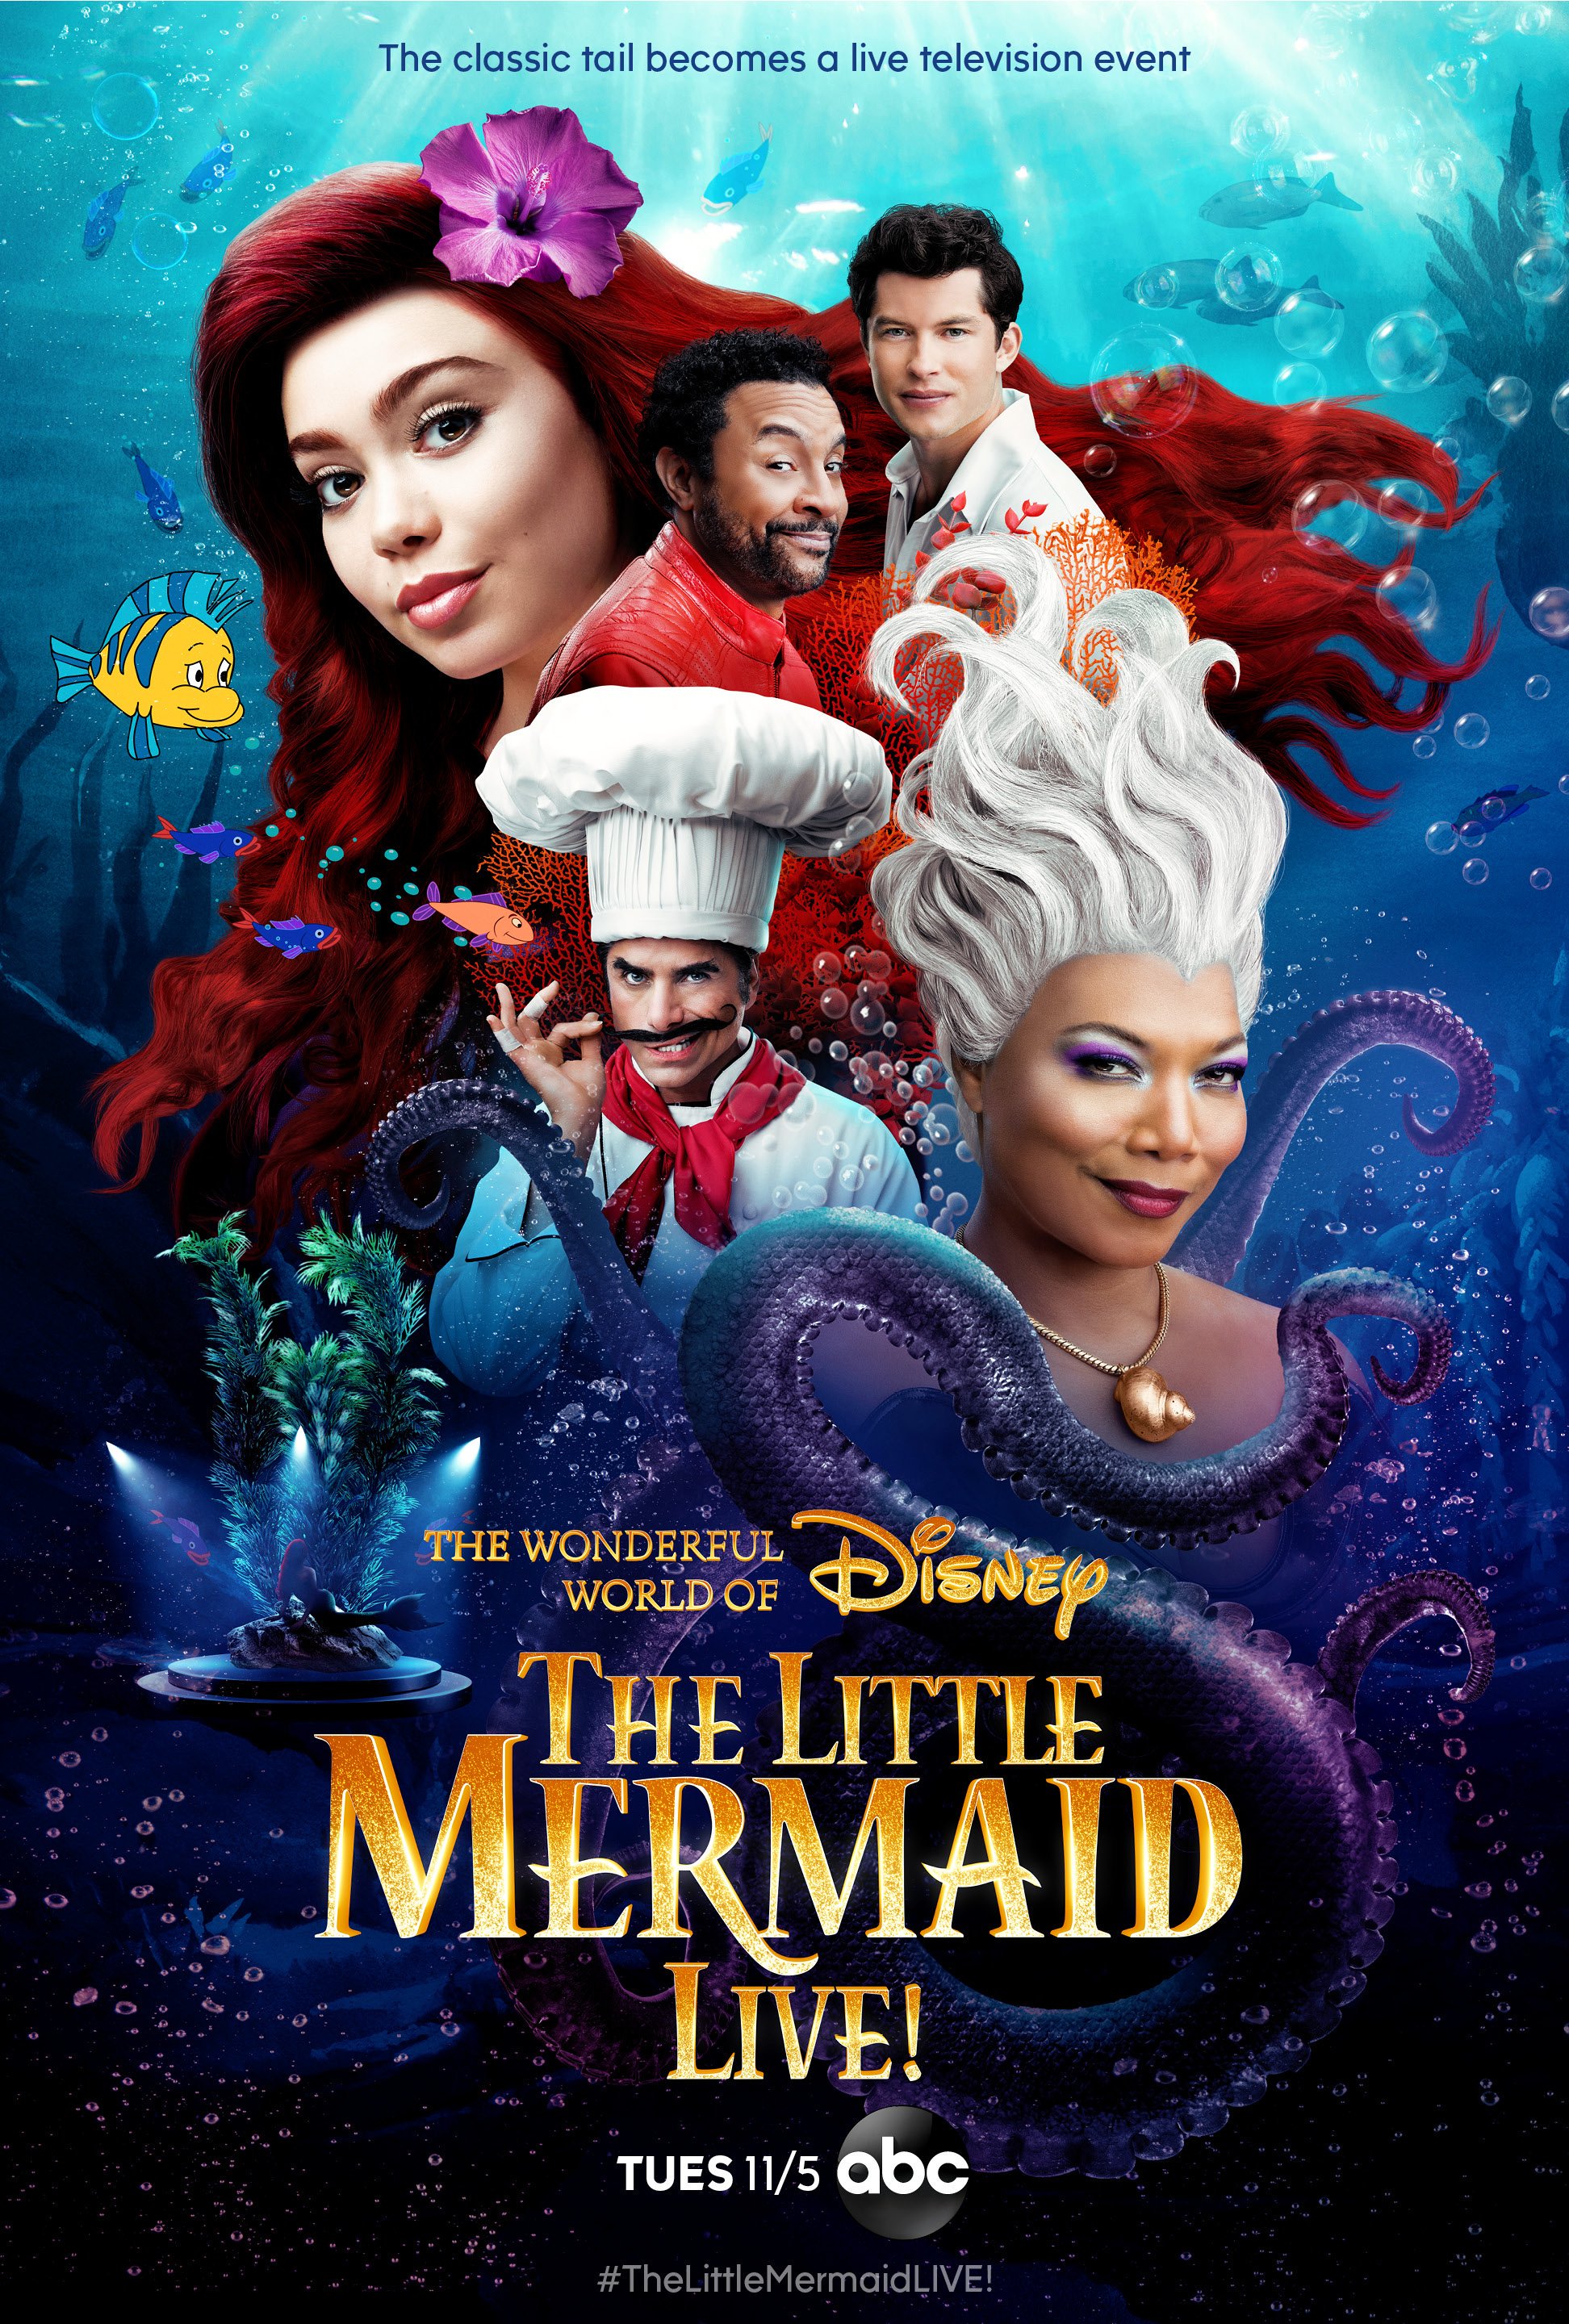 The Little Mermaid: Against the Tide Book – Live Action Film